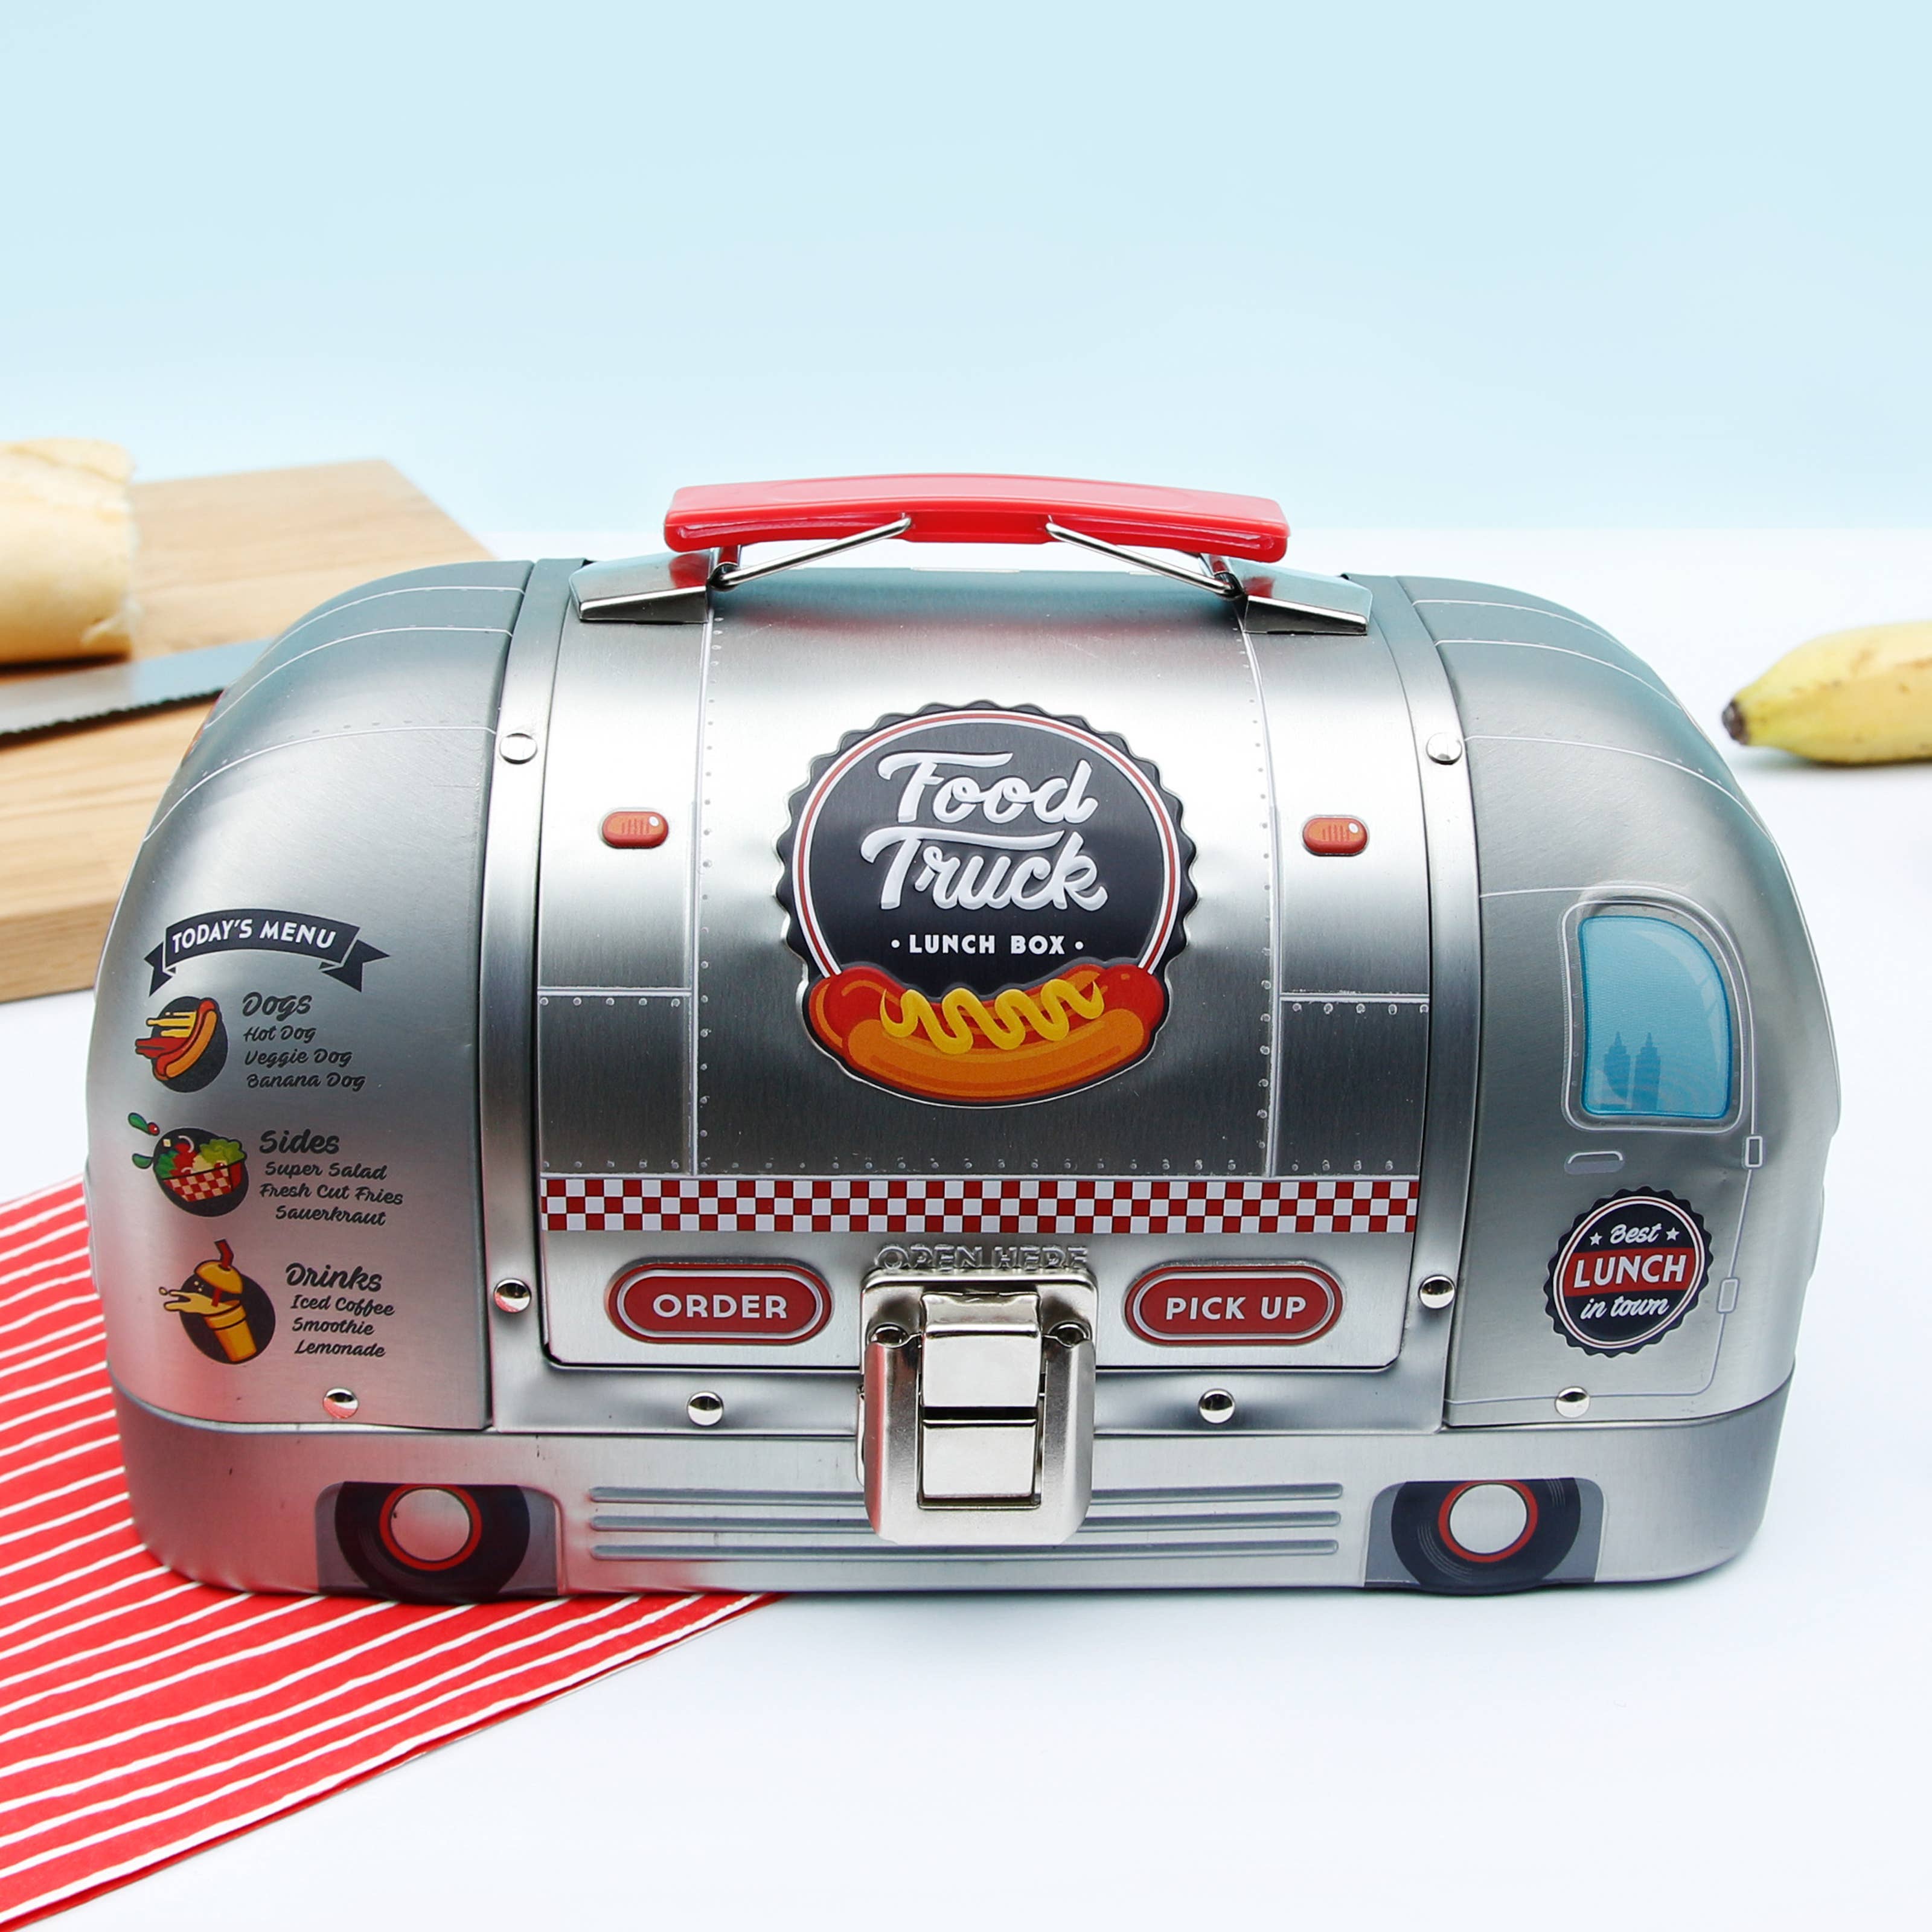 FOOD TRUCK LUNCH BOX